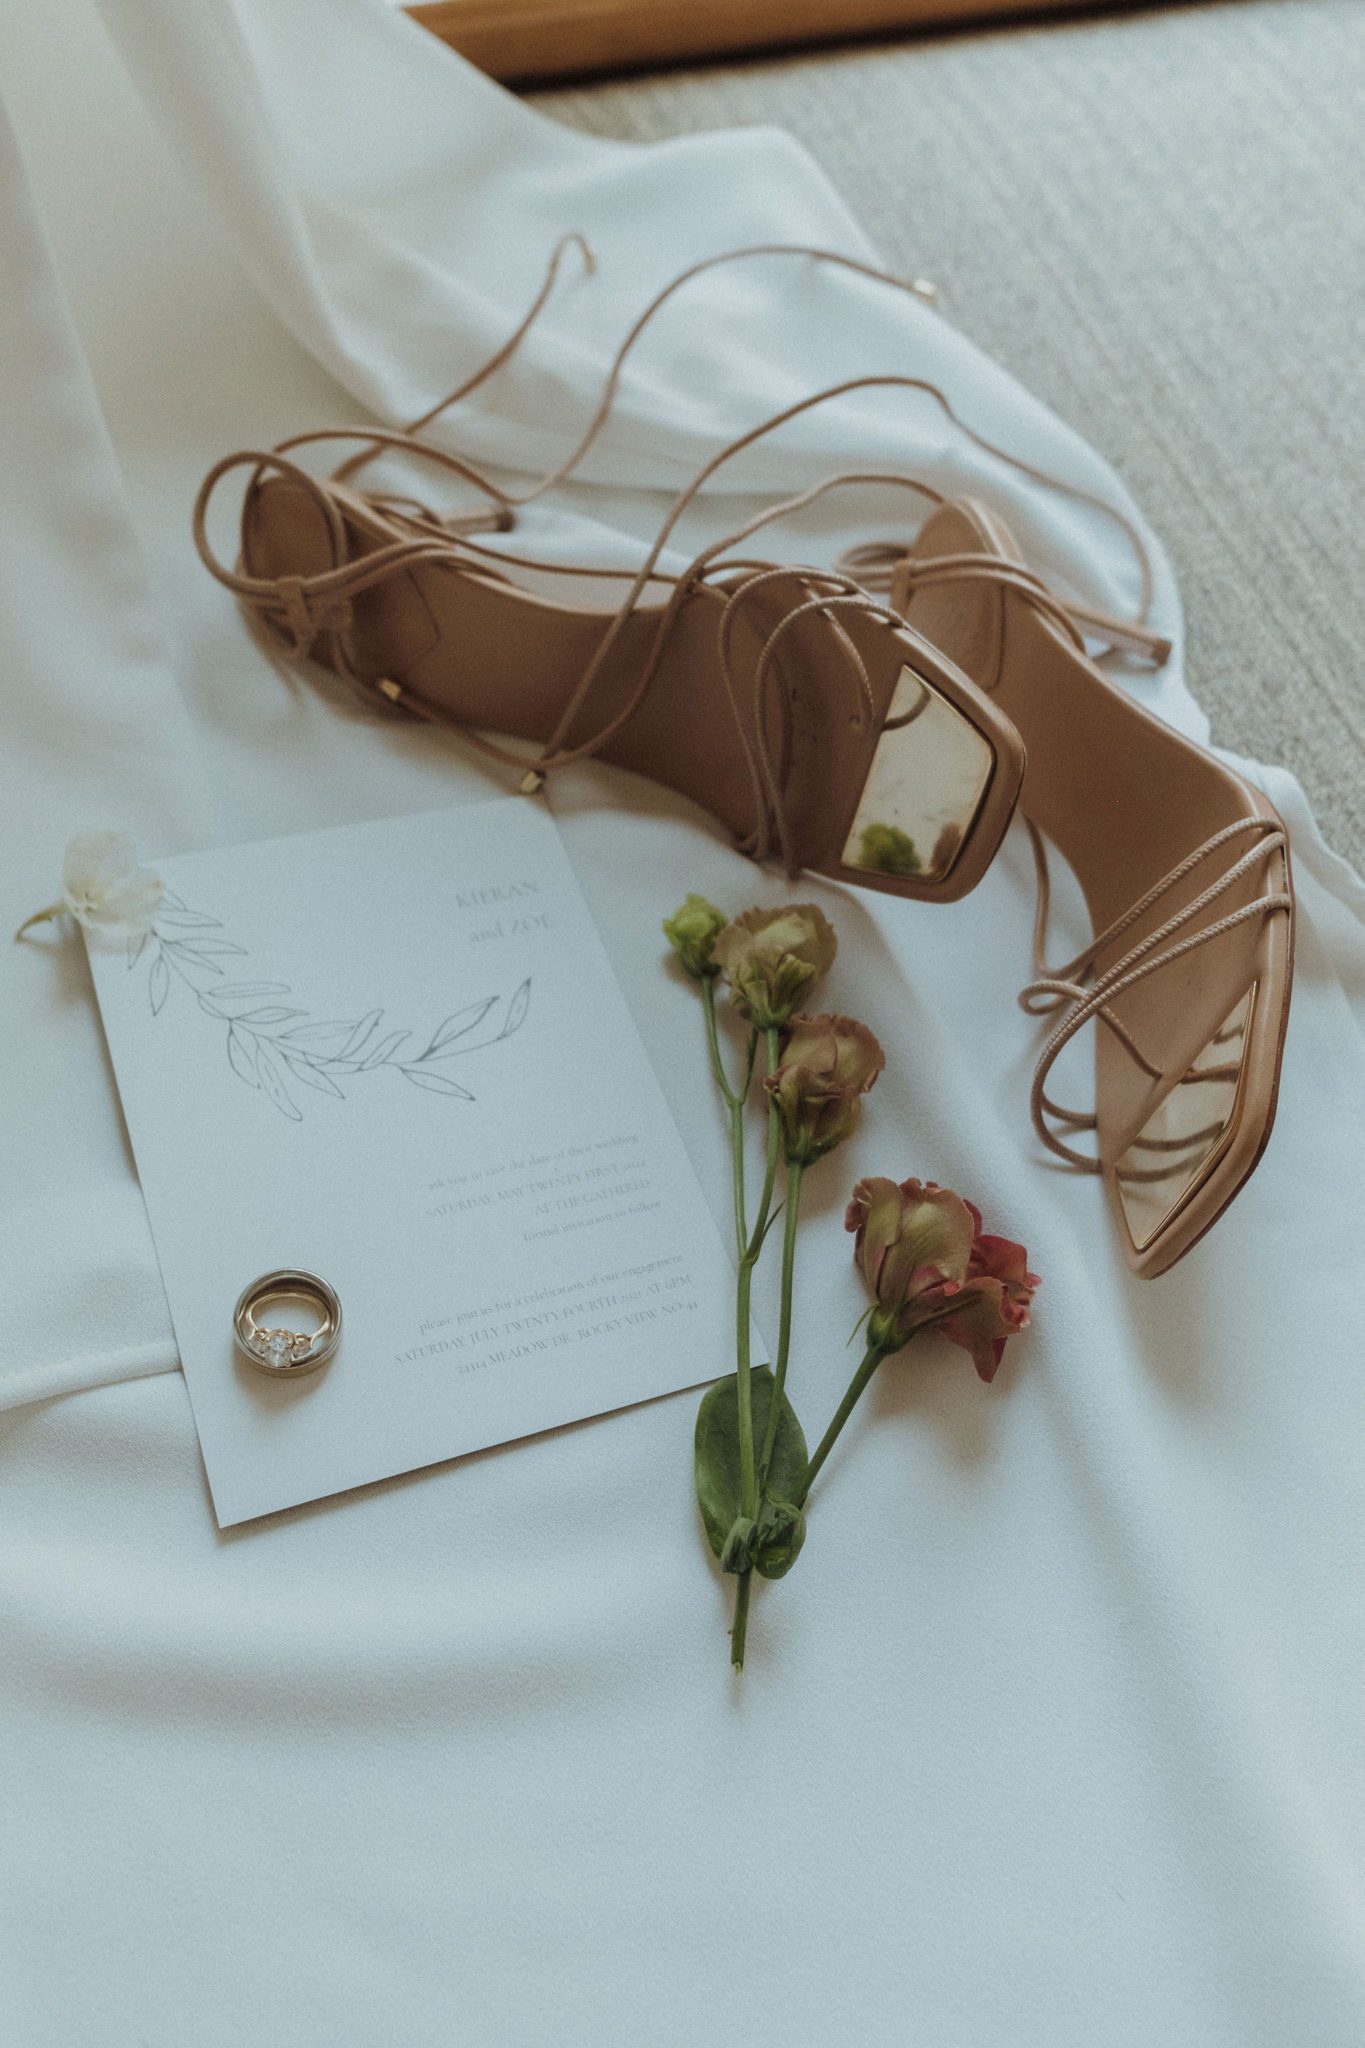 Bridal details of heels and custom wedding invitation with dried roses